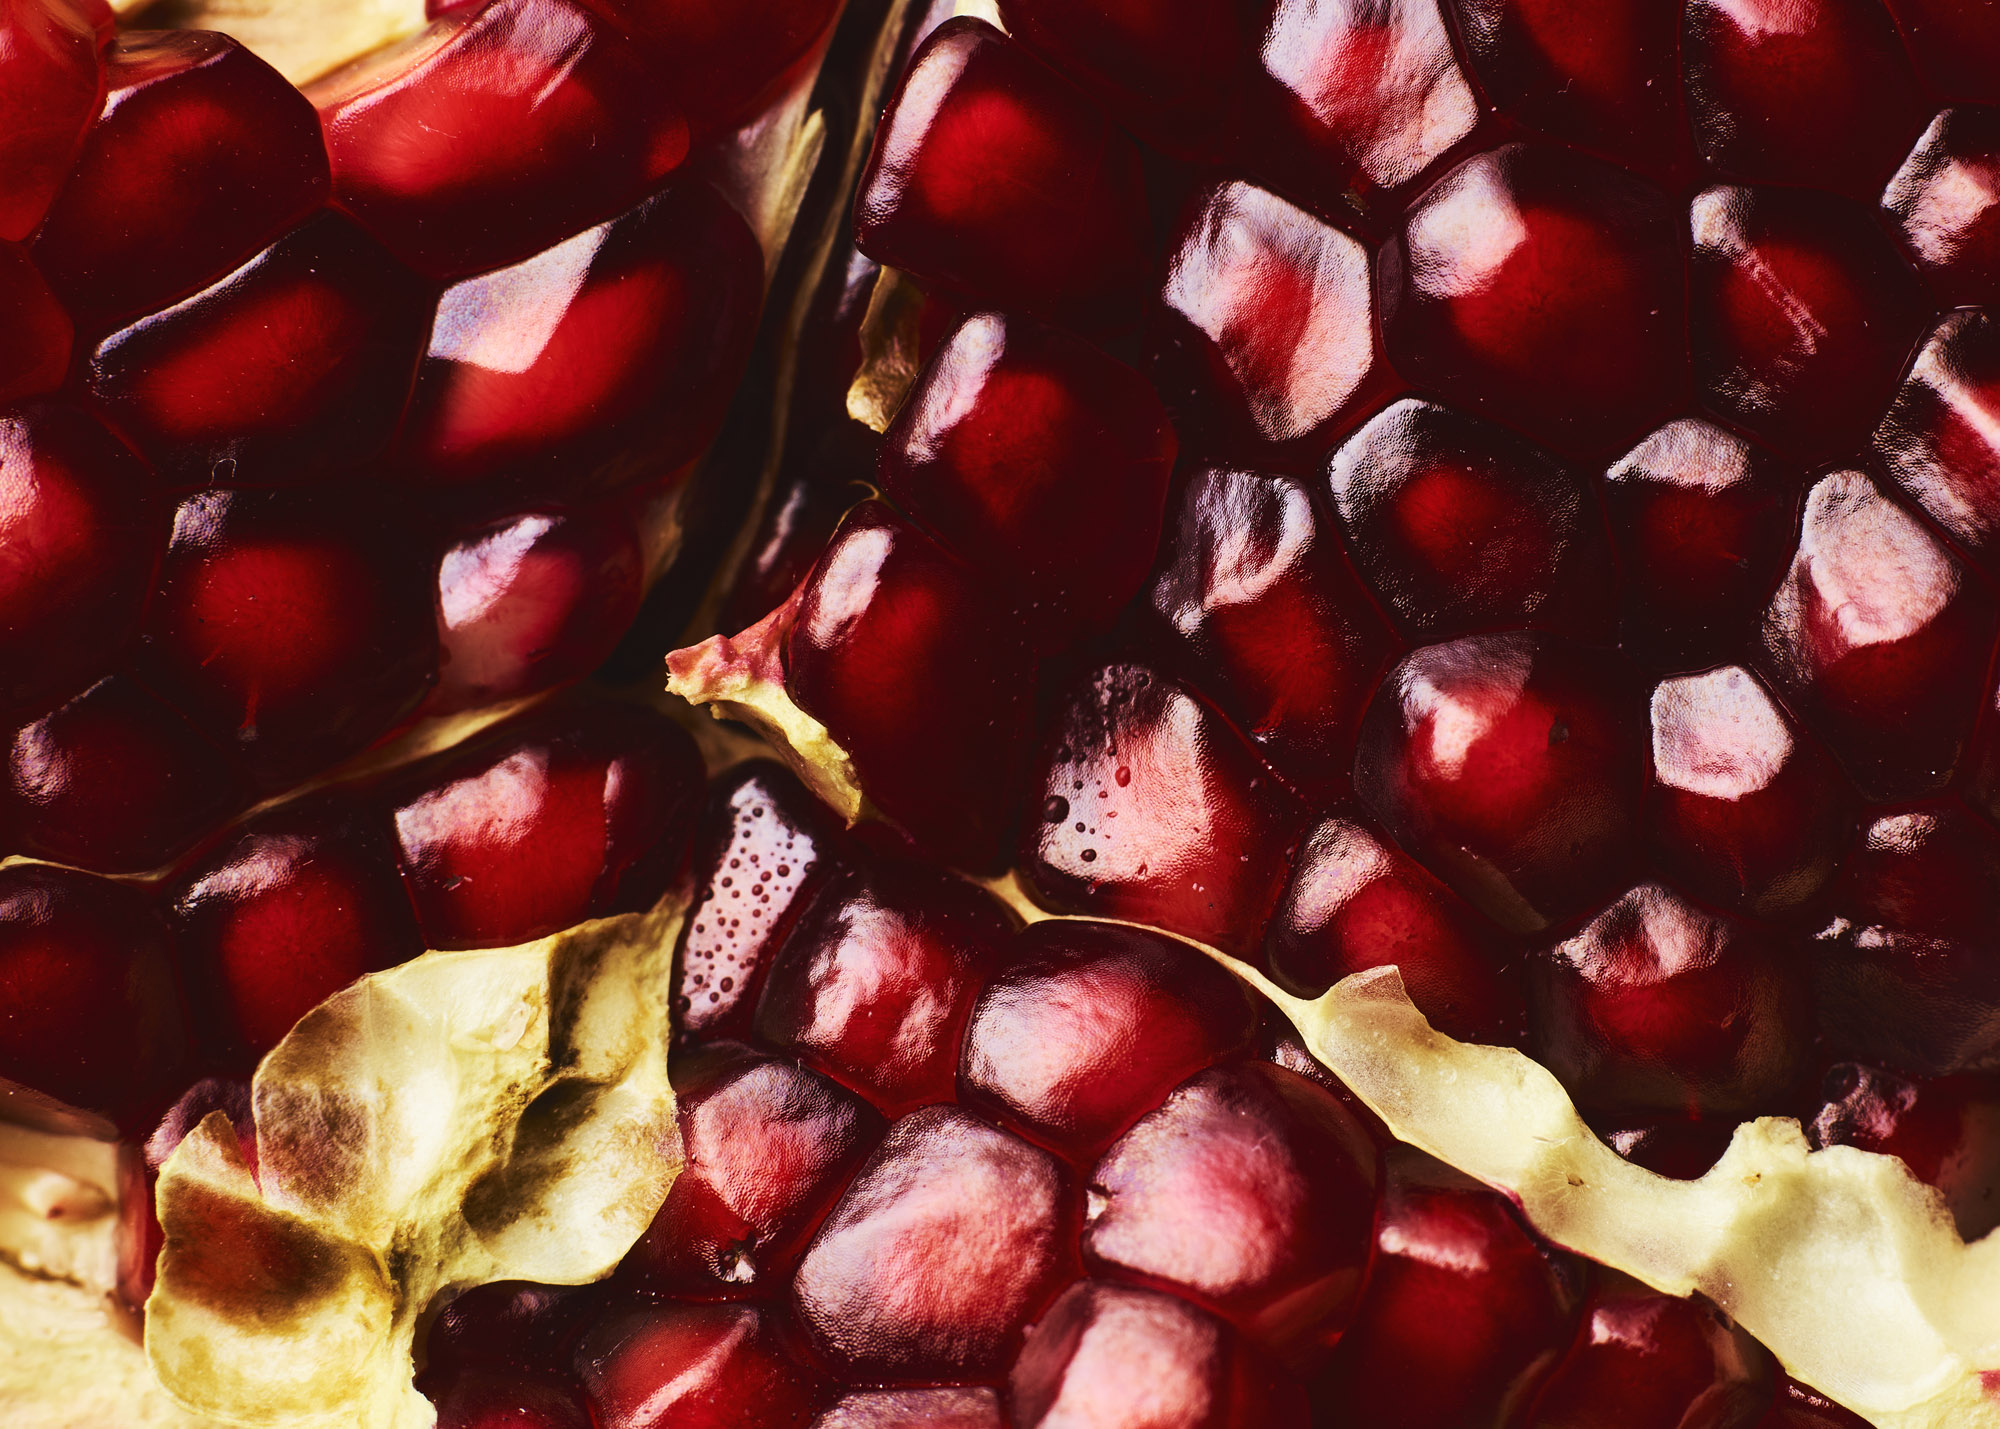 About us, our values in images - Close up look of a pomegranate